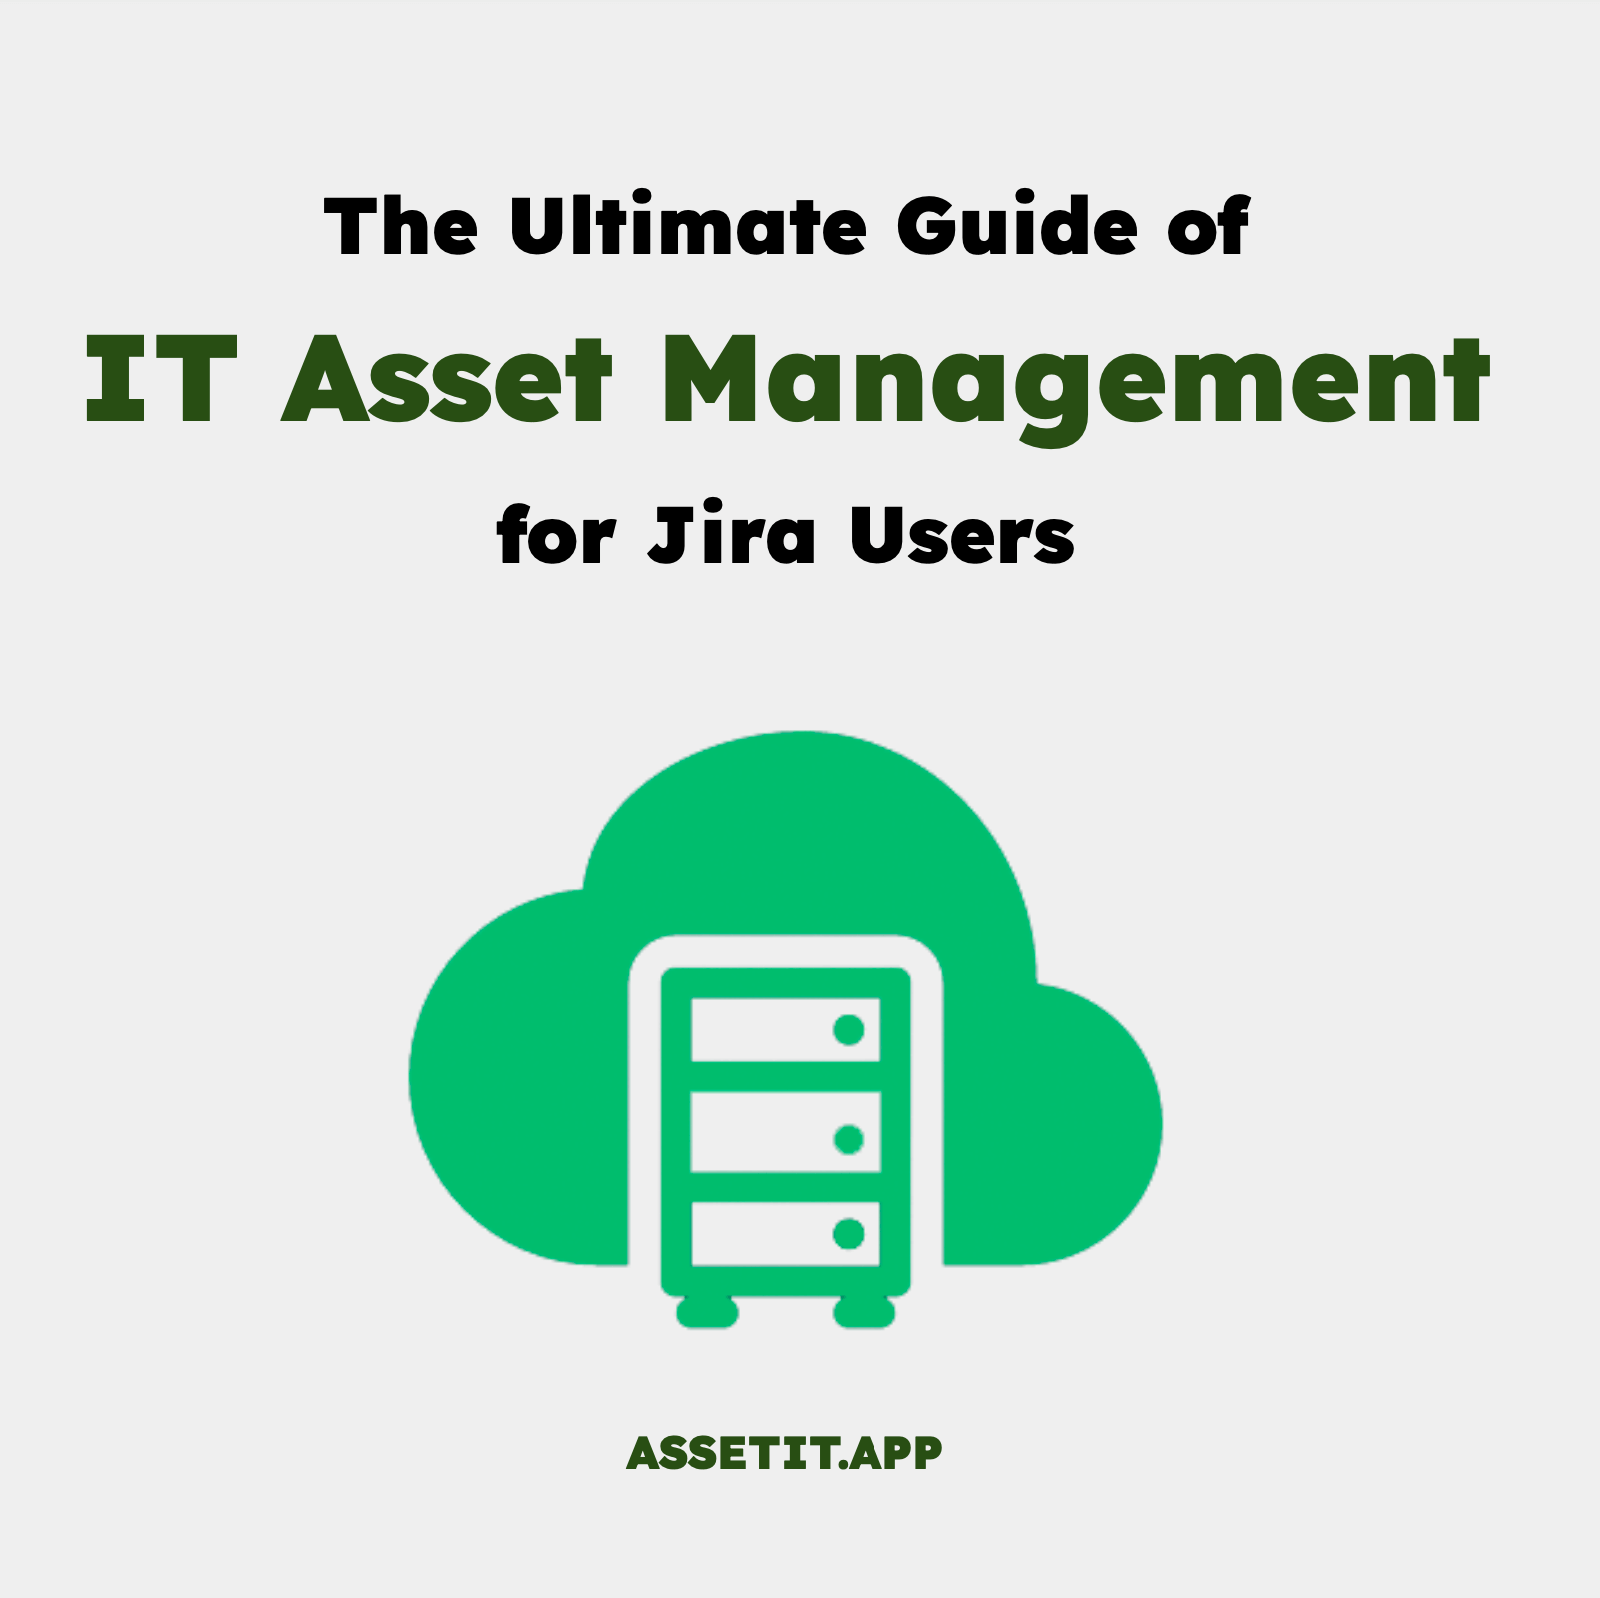 The ultimate guide of IT Asset Management for Jira users